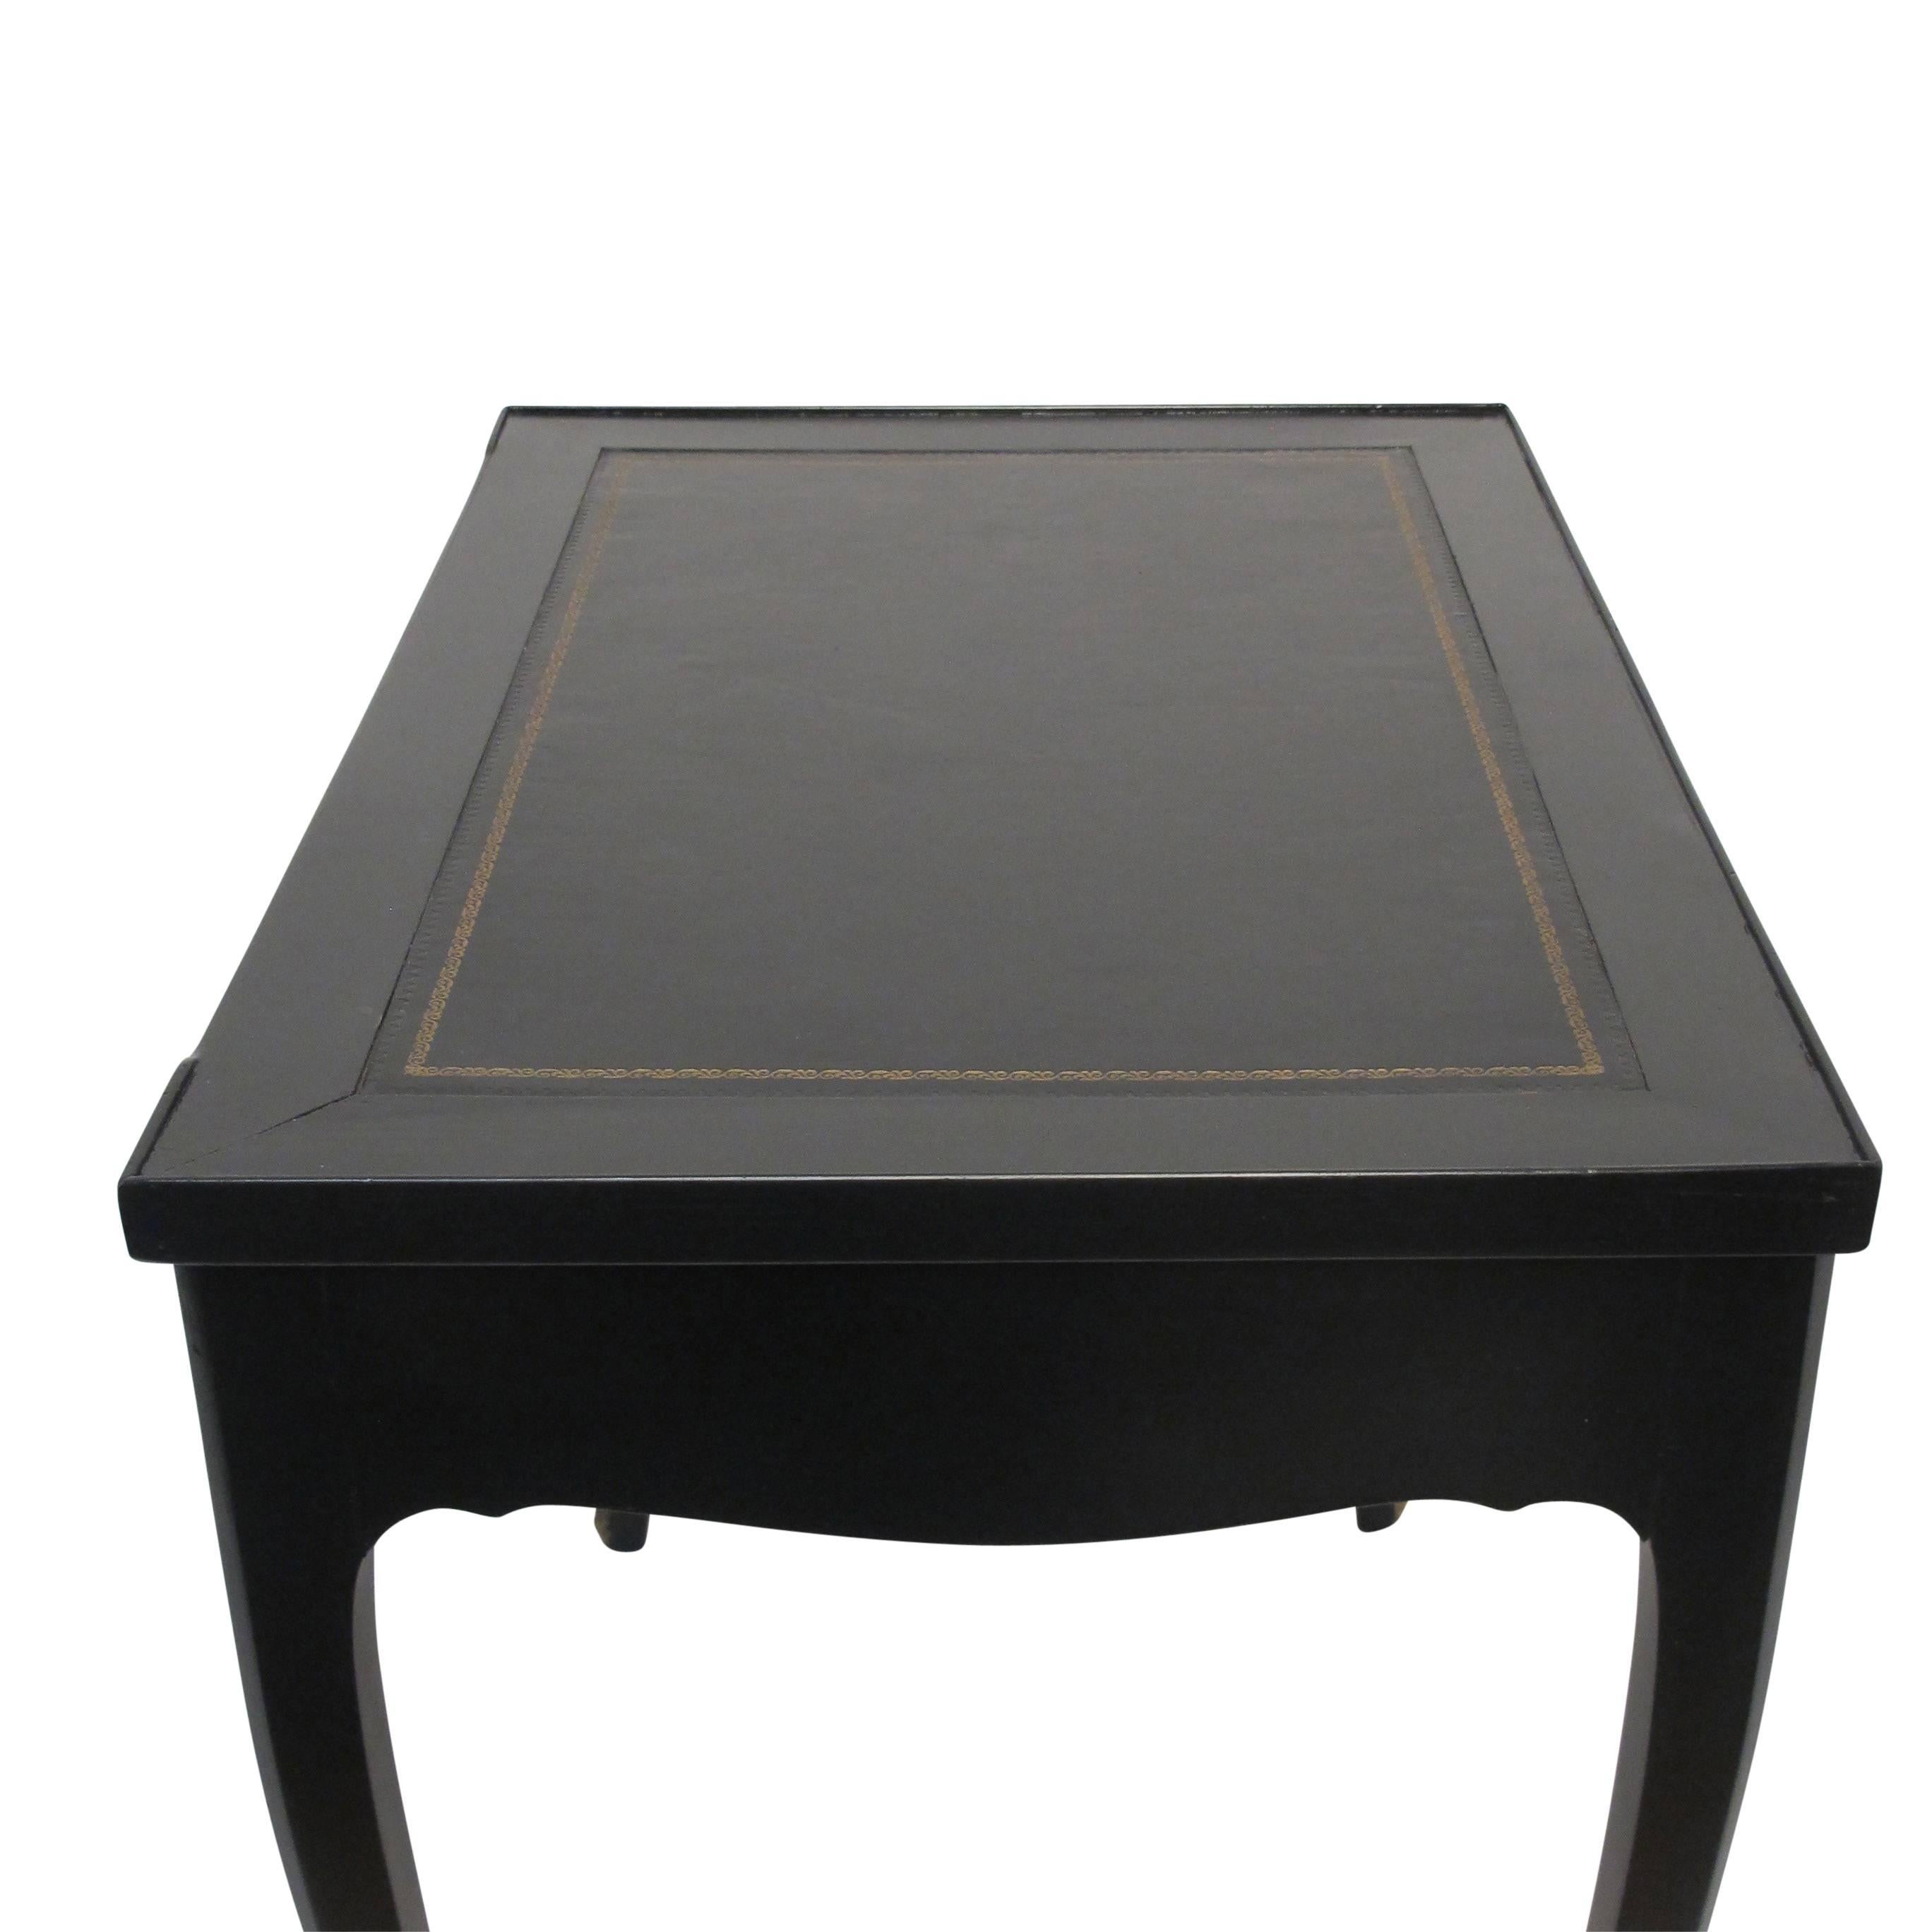 Stylish black lacquered writing table and tric trac games table. The writing surface having inset leather with gold tooling. The interior of the games table inlaid with green and yellow backgammon board, the reverse of the top laid with green baize